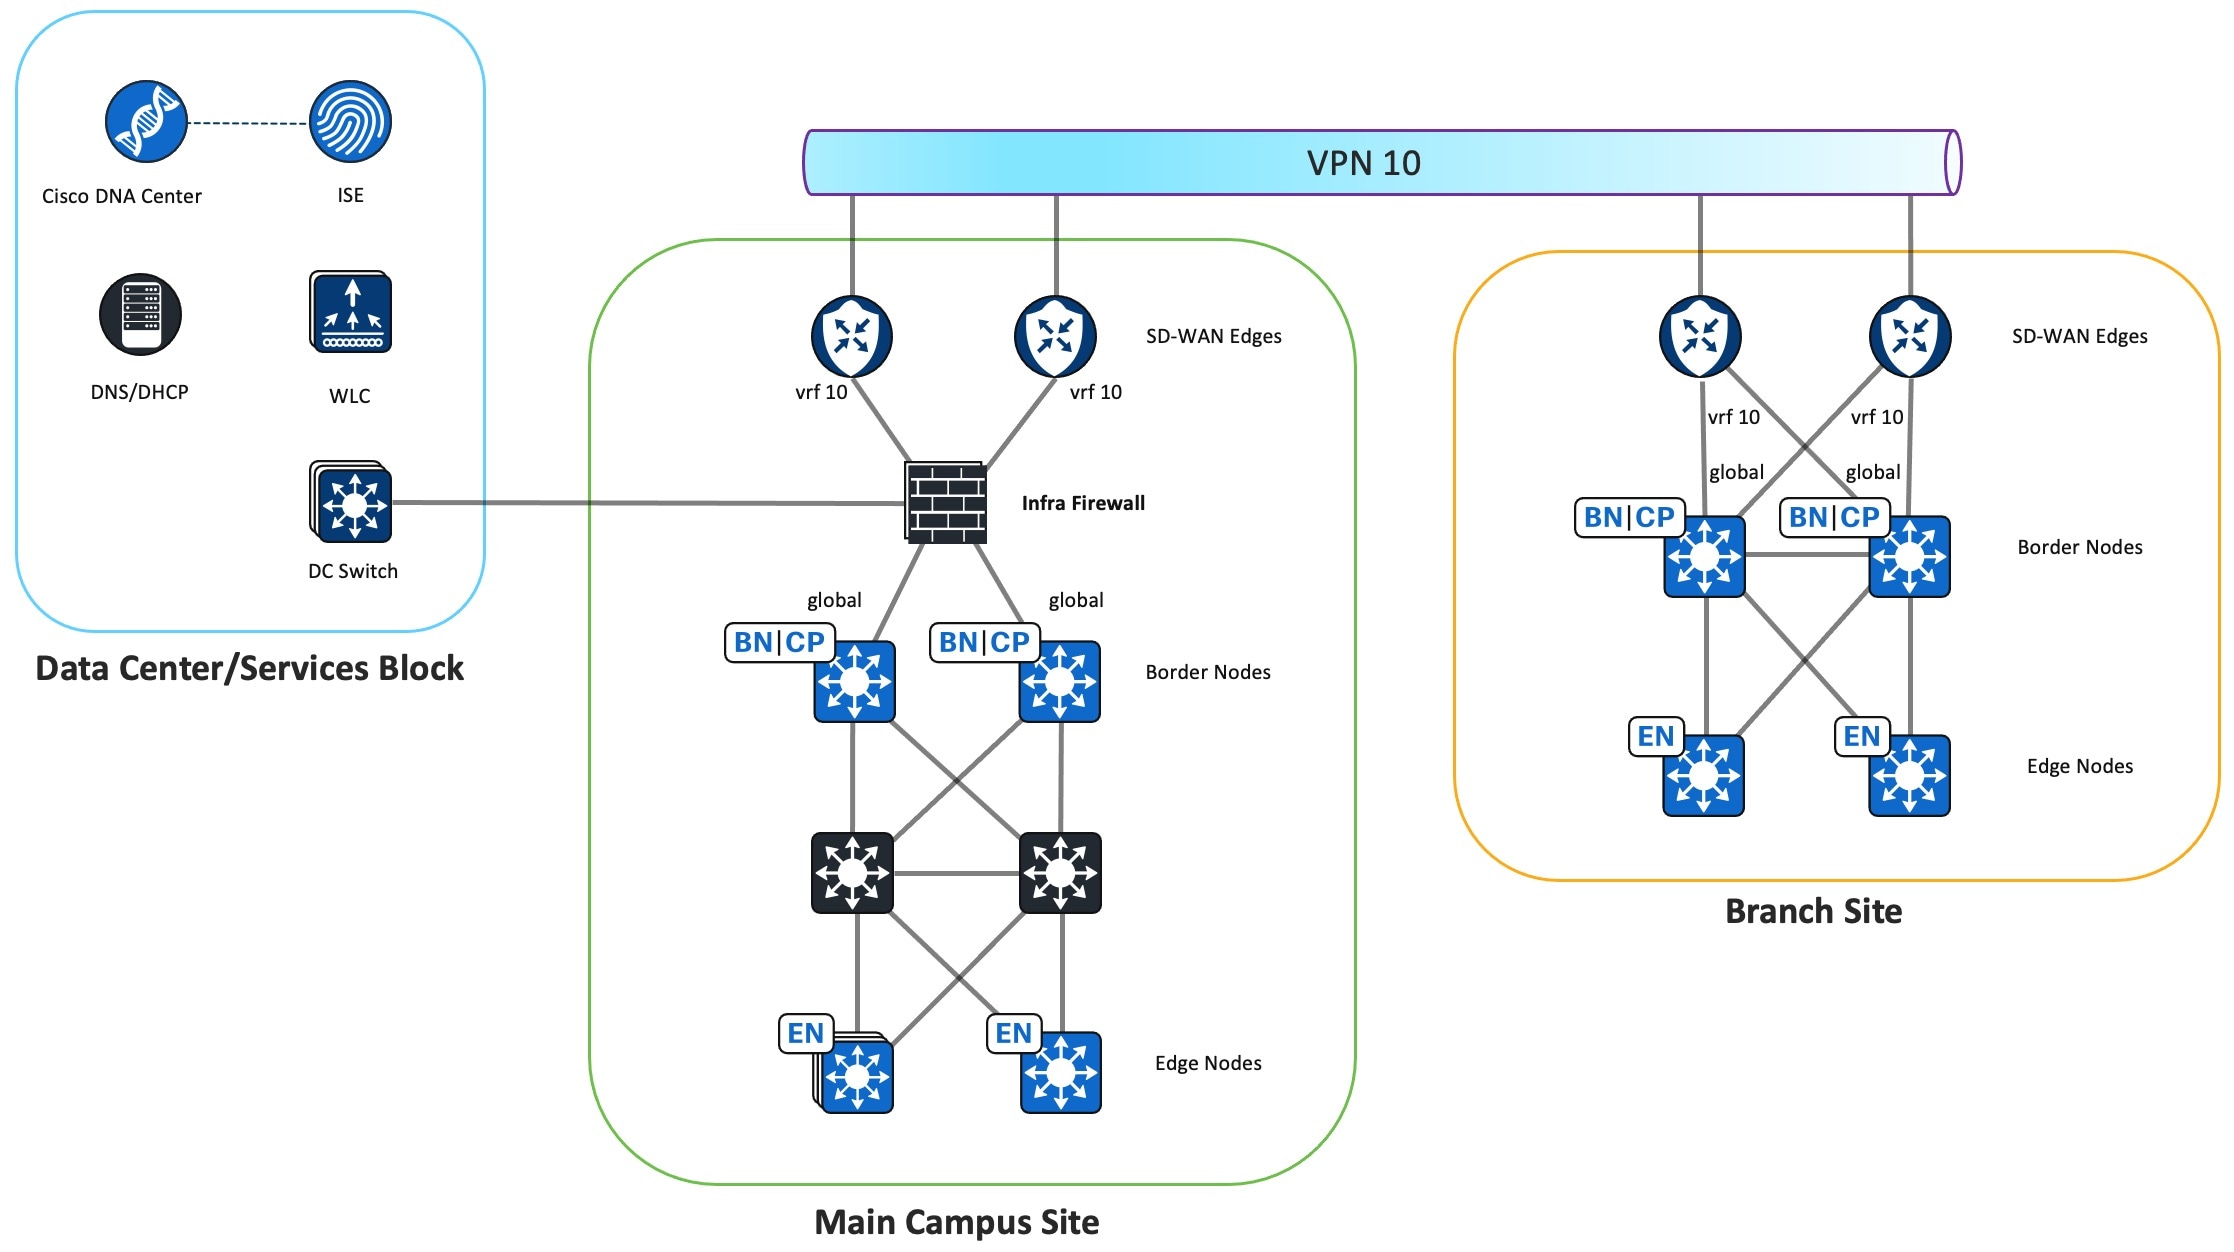 The Infra Firewall Instance topology displays the Infra Firewall instance located in the main campus site. This instance connects to the data center and VPN 10. VPN 10 also connects to the branch site.